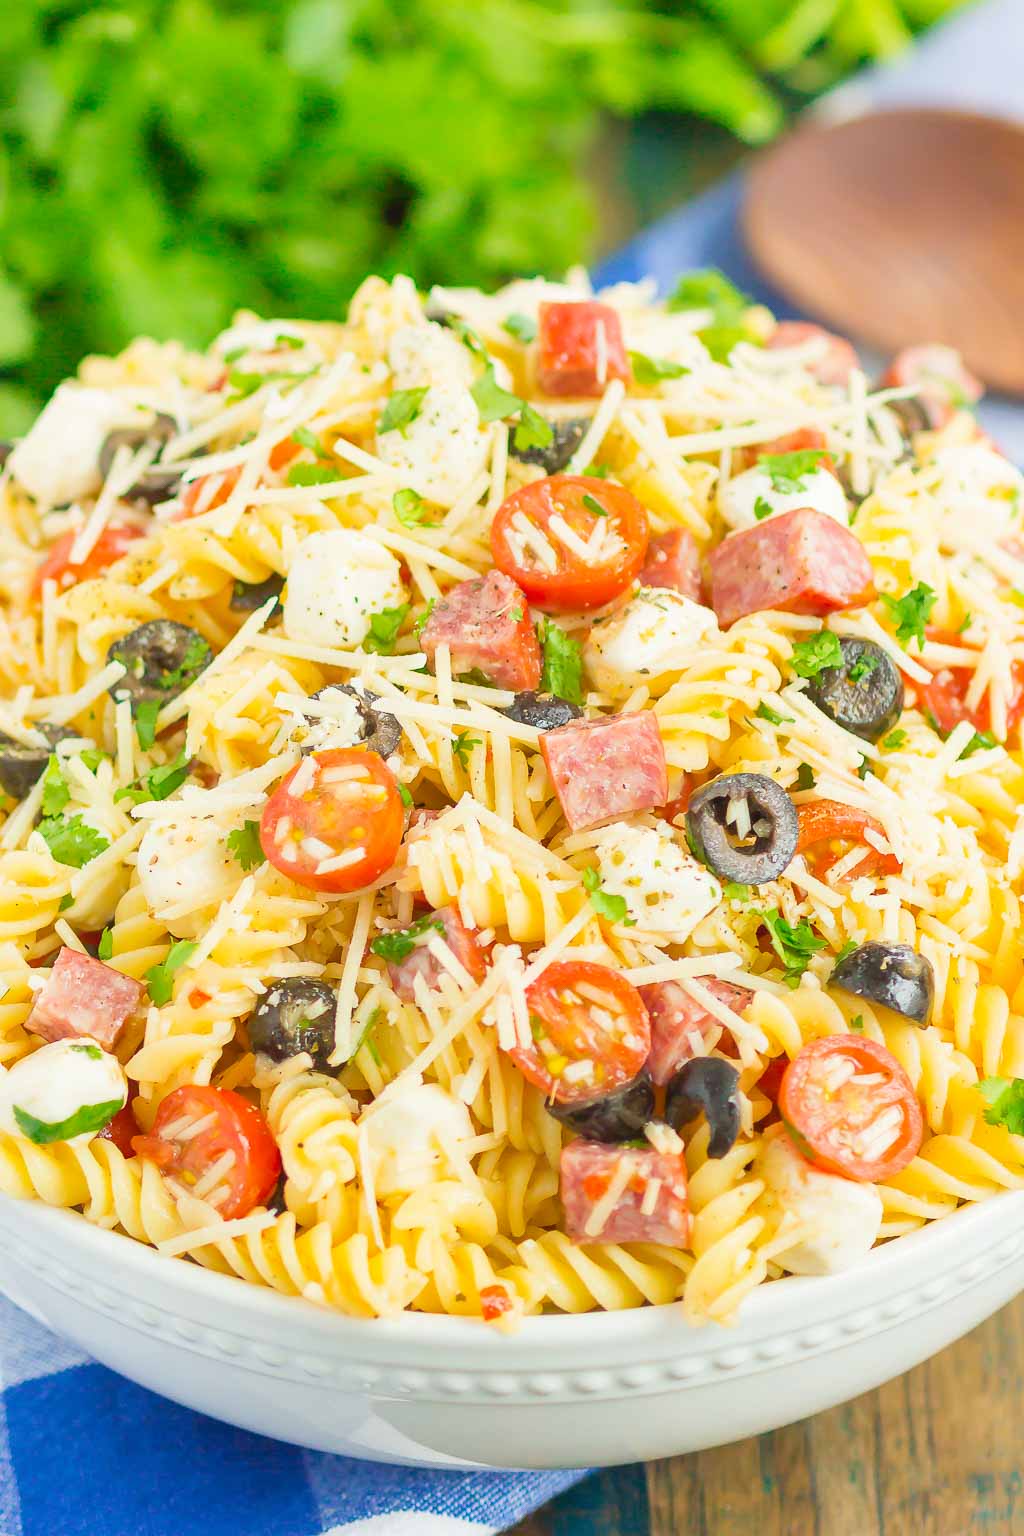 Easy Italian Pasta Salad is fast, fresh, and loaded with flavor. This zesty salad is packed with classic favorites, like salami, mozzarella pearls, black olives, cherry tomatoes and then tossed in a simple Italian dressing. Easy to make and ready in less than 30 minutes, this salad is perfect to serve for those summer parties and get-togethers! #pastasalad #italianpastasalad